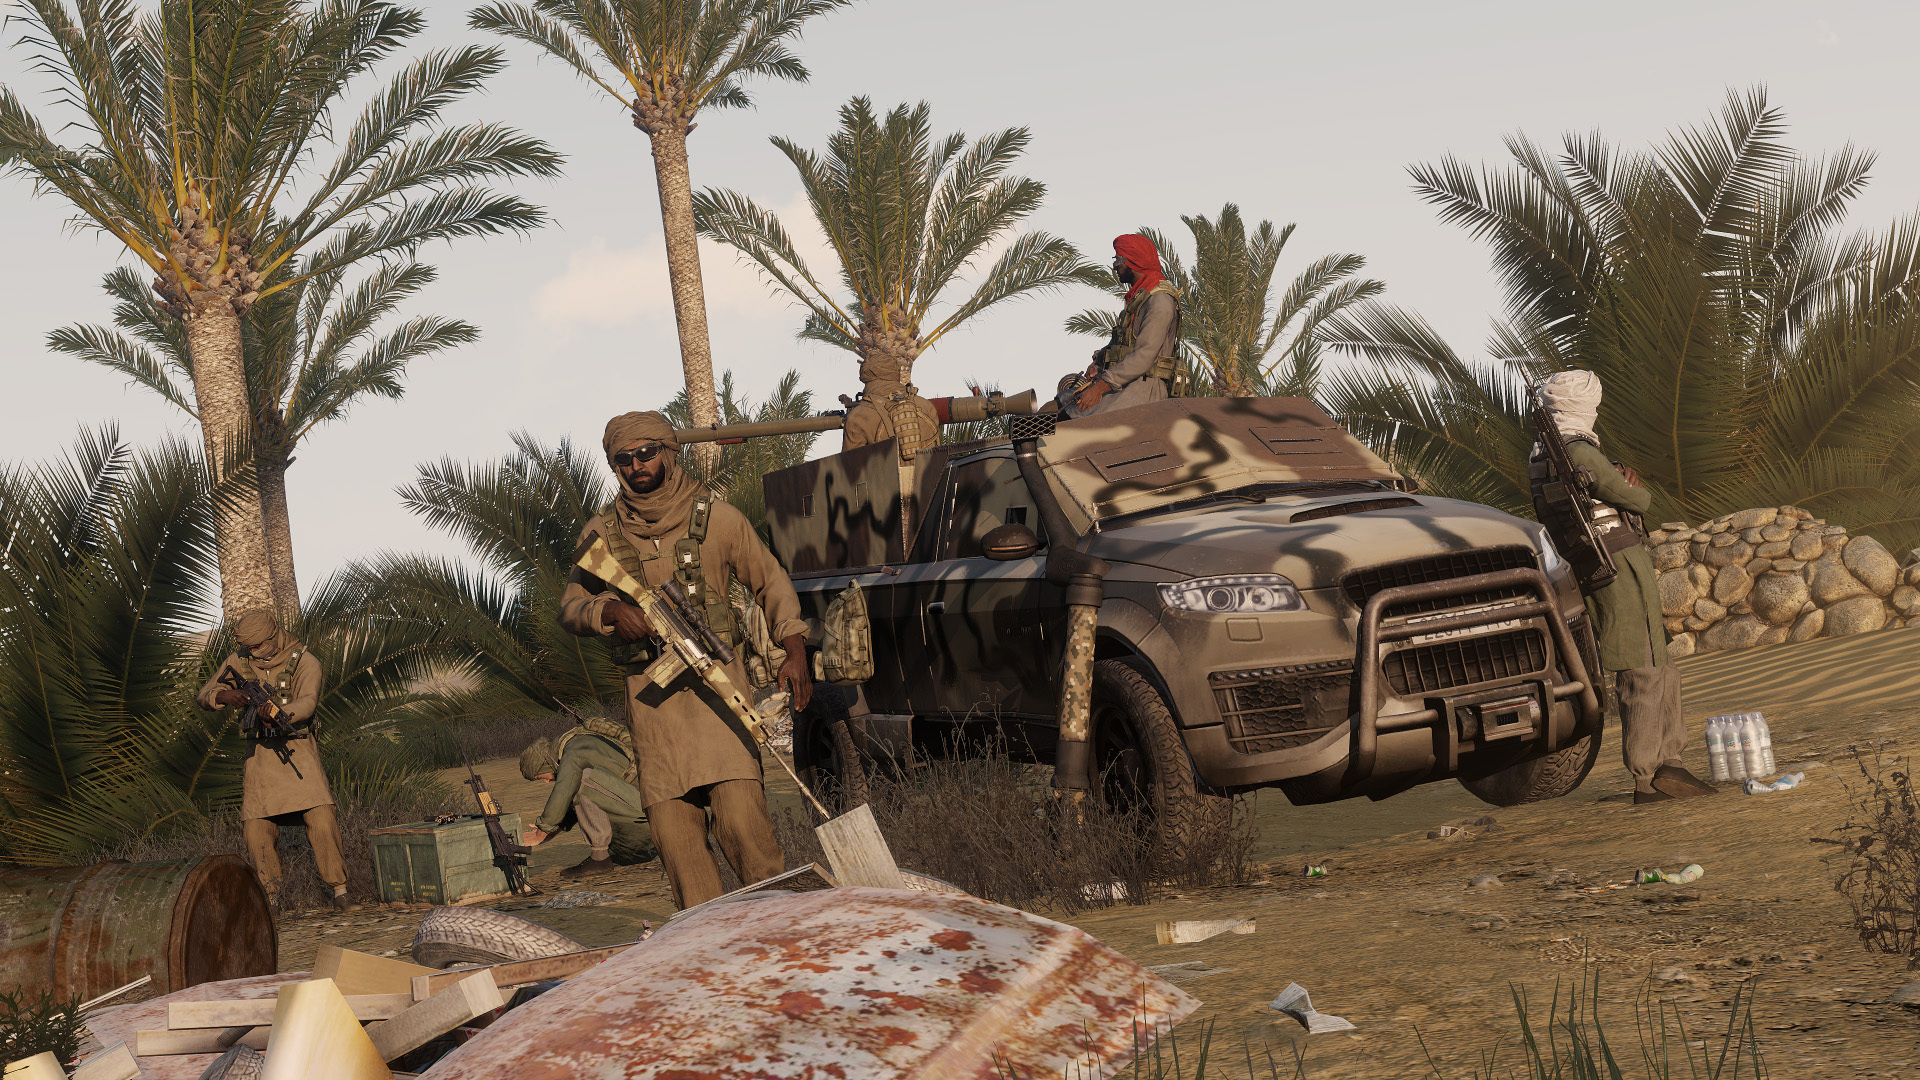 Arma Platform on X: Creator SPOTREP / FROM: @TheRotators / TO: #Arma3  Creator DLC Users / UNIT: Western Sahara / ACTIVITY: Update 1.1.2 (Patch  for version 1.1) / SIZE: ~3.6 GB Changelog